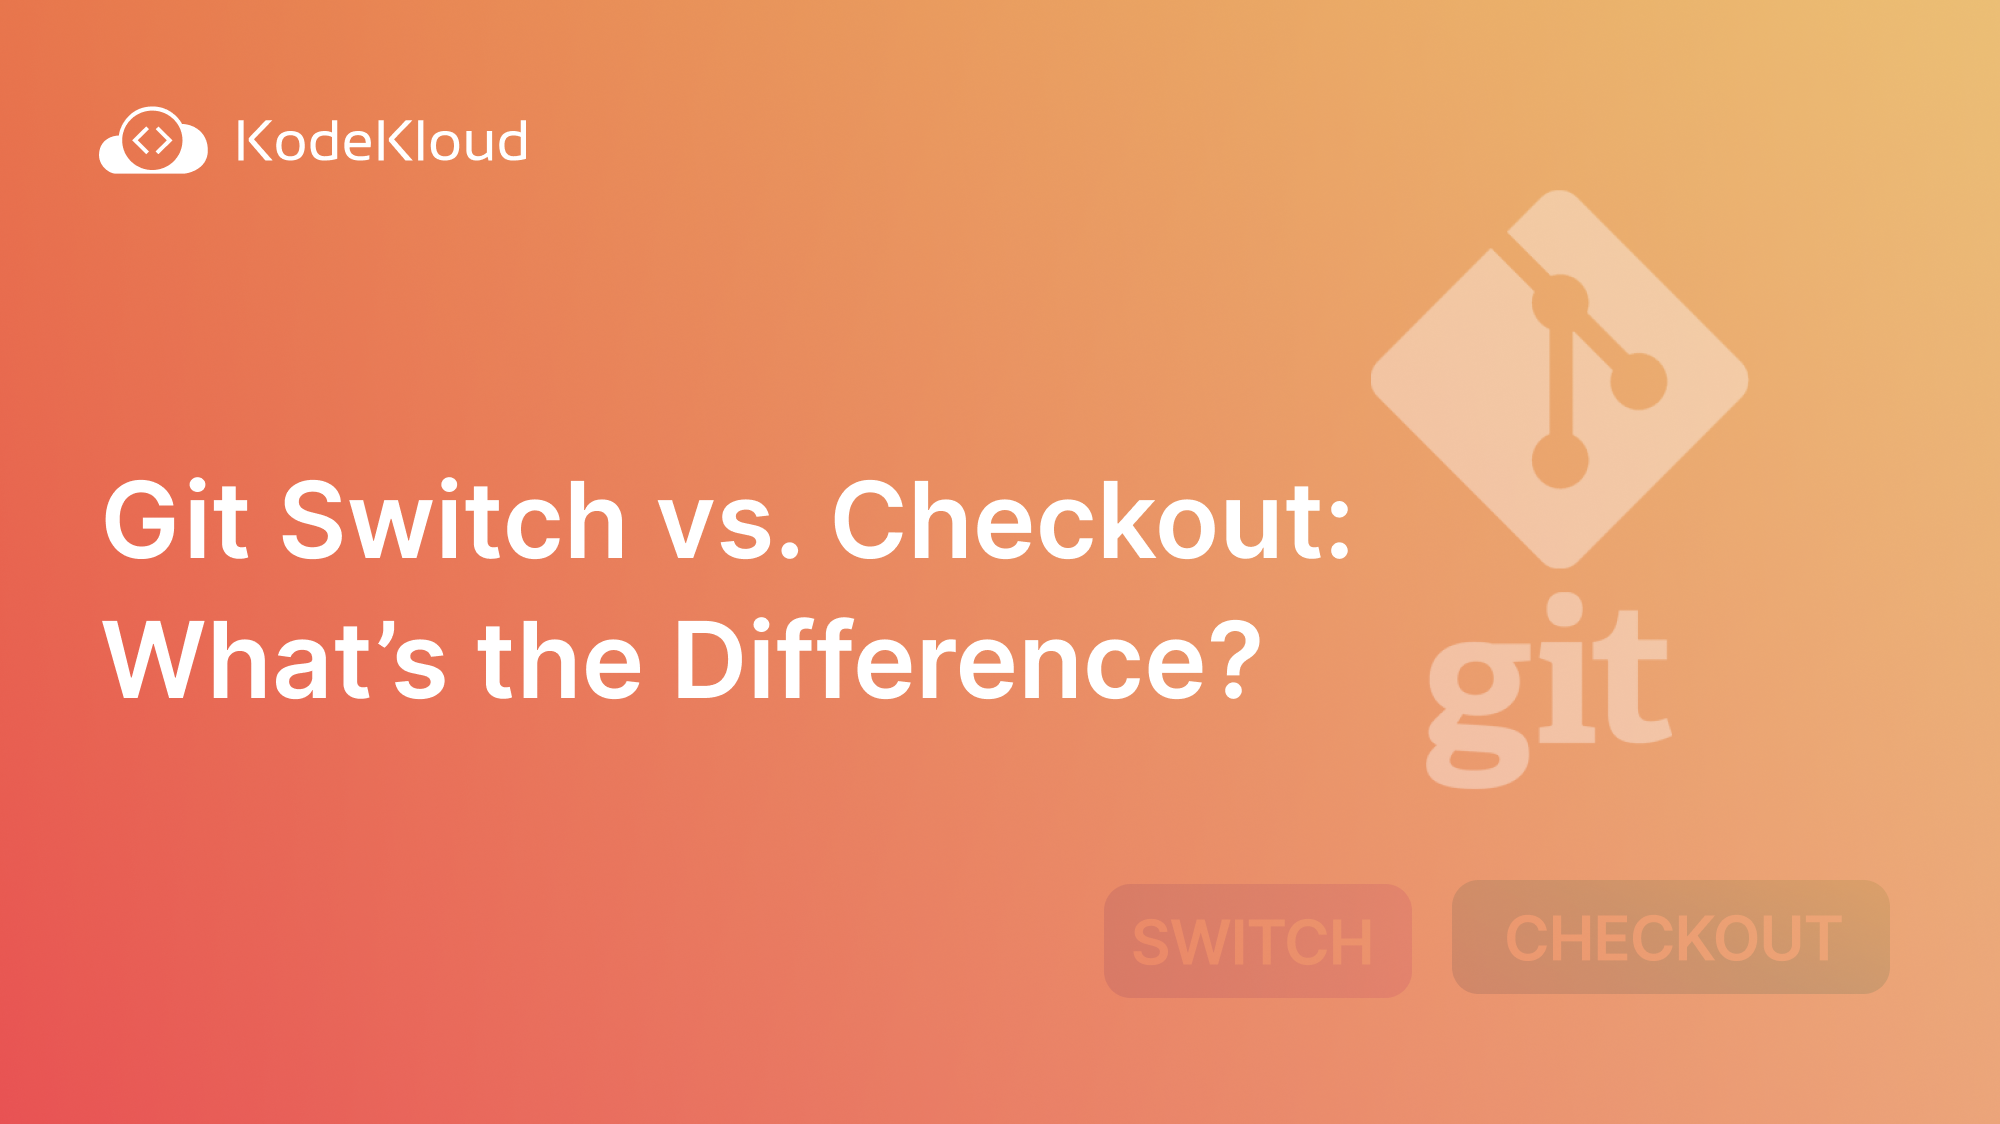 Git Switch vs. Checkout: What’s the Difference?